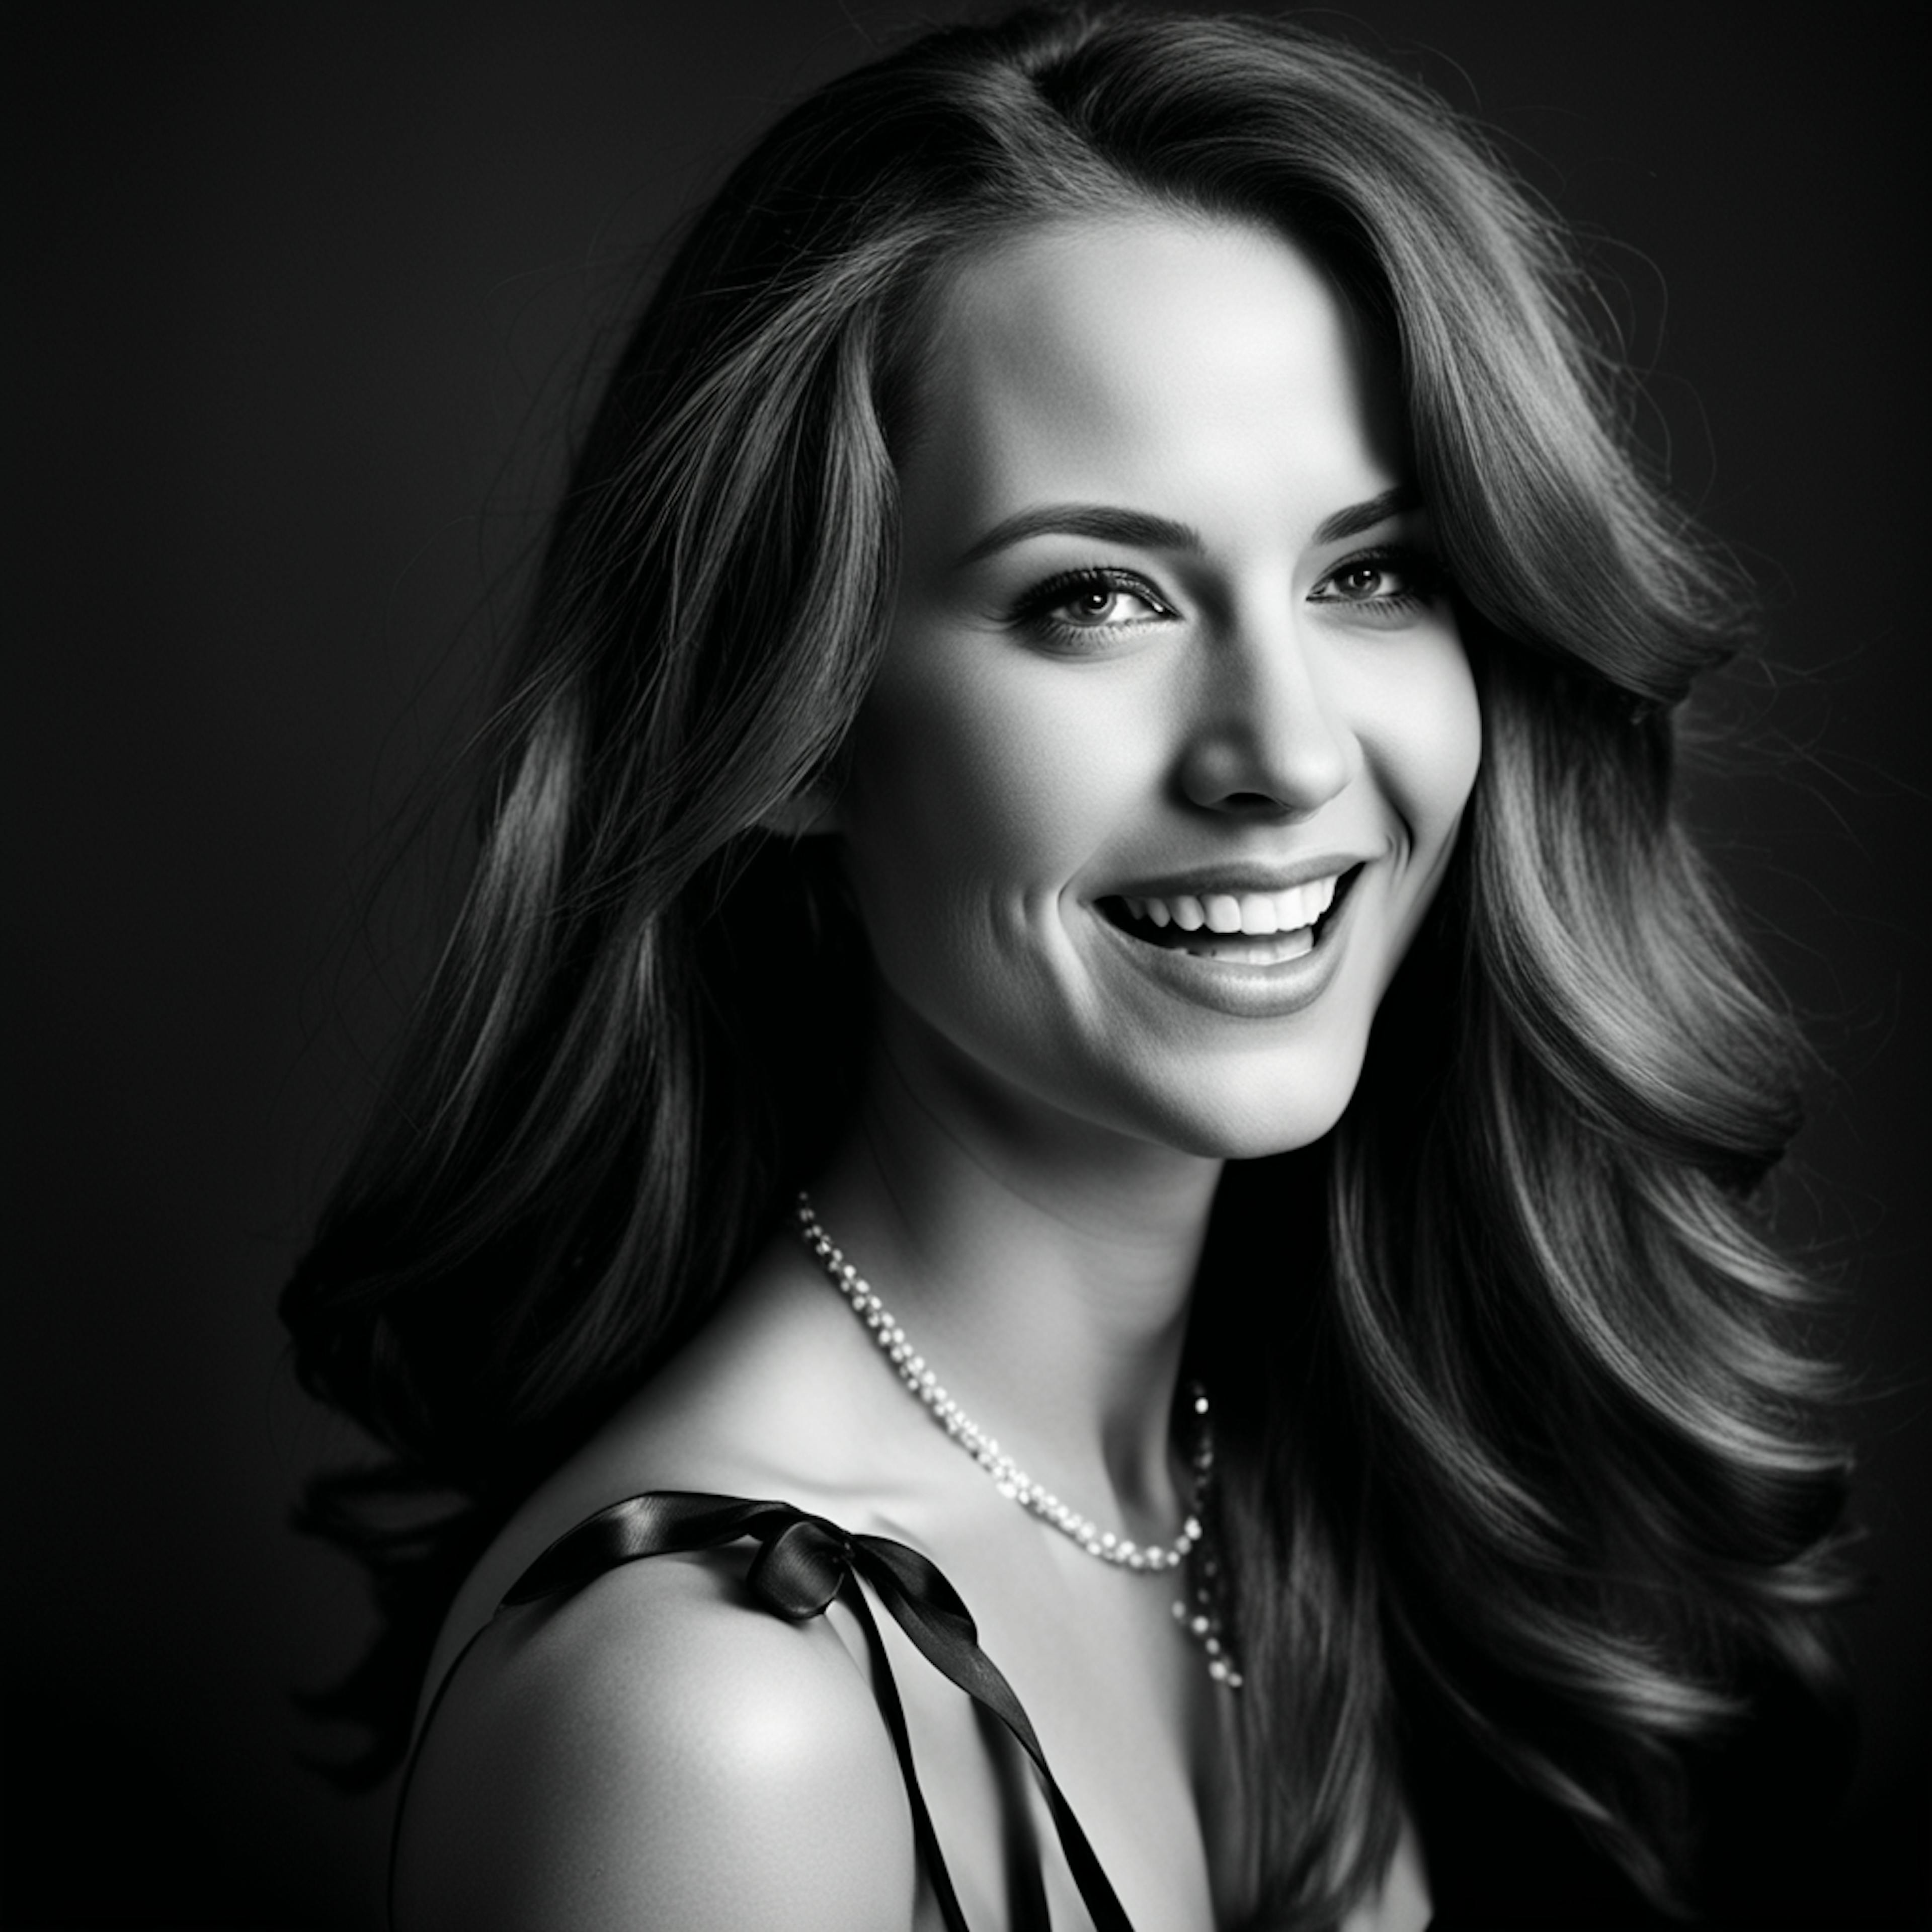 A black-and-white portrait of a woman with long, flowing hair and a radiant smile. She is wearing a pearl necklace and a dress with ribbon straps. This elegant photograph could be part of a health and wellness marketing agency's campaign, emphasizing beauty and confidence.